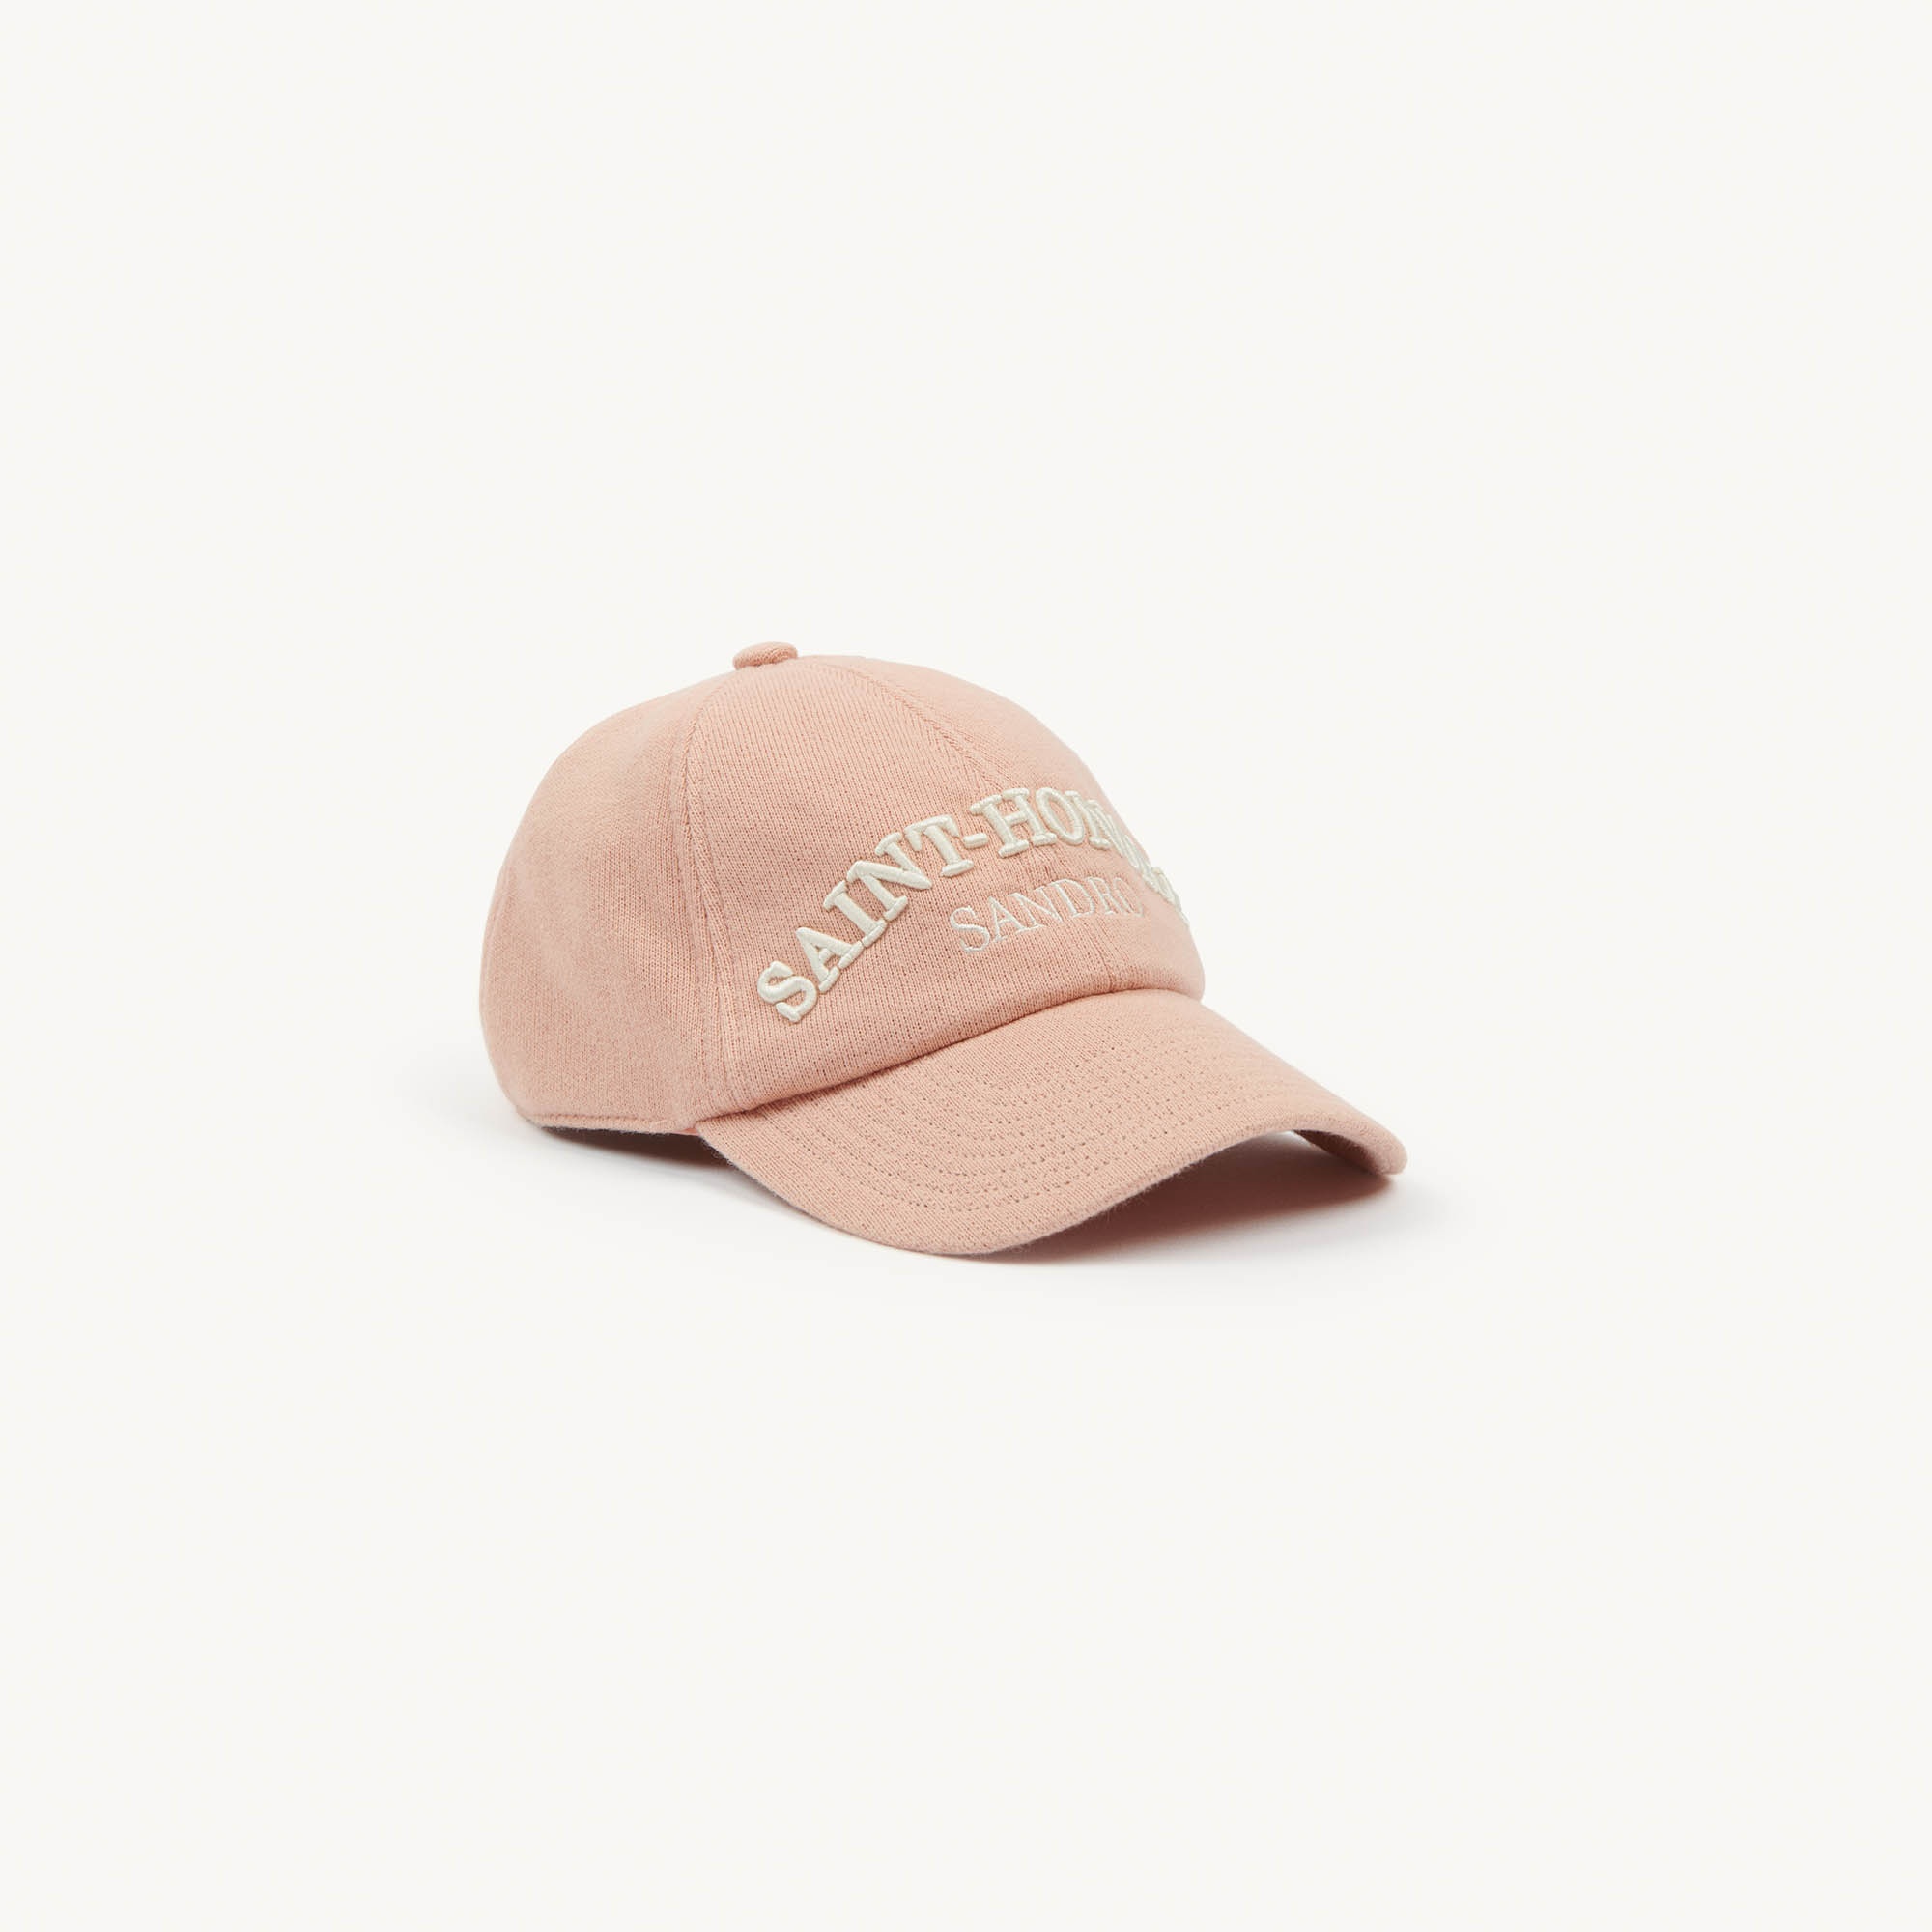 Embroidered cap - 1